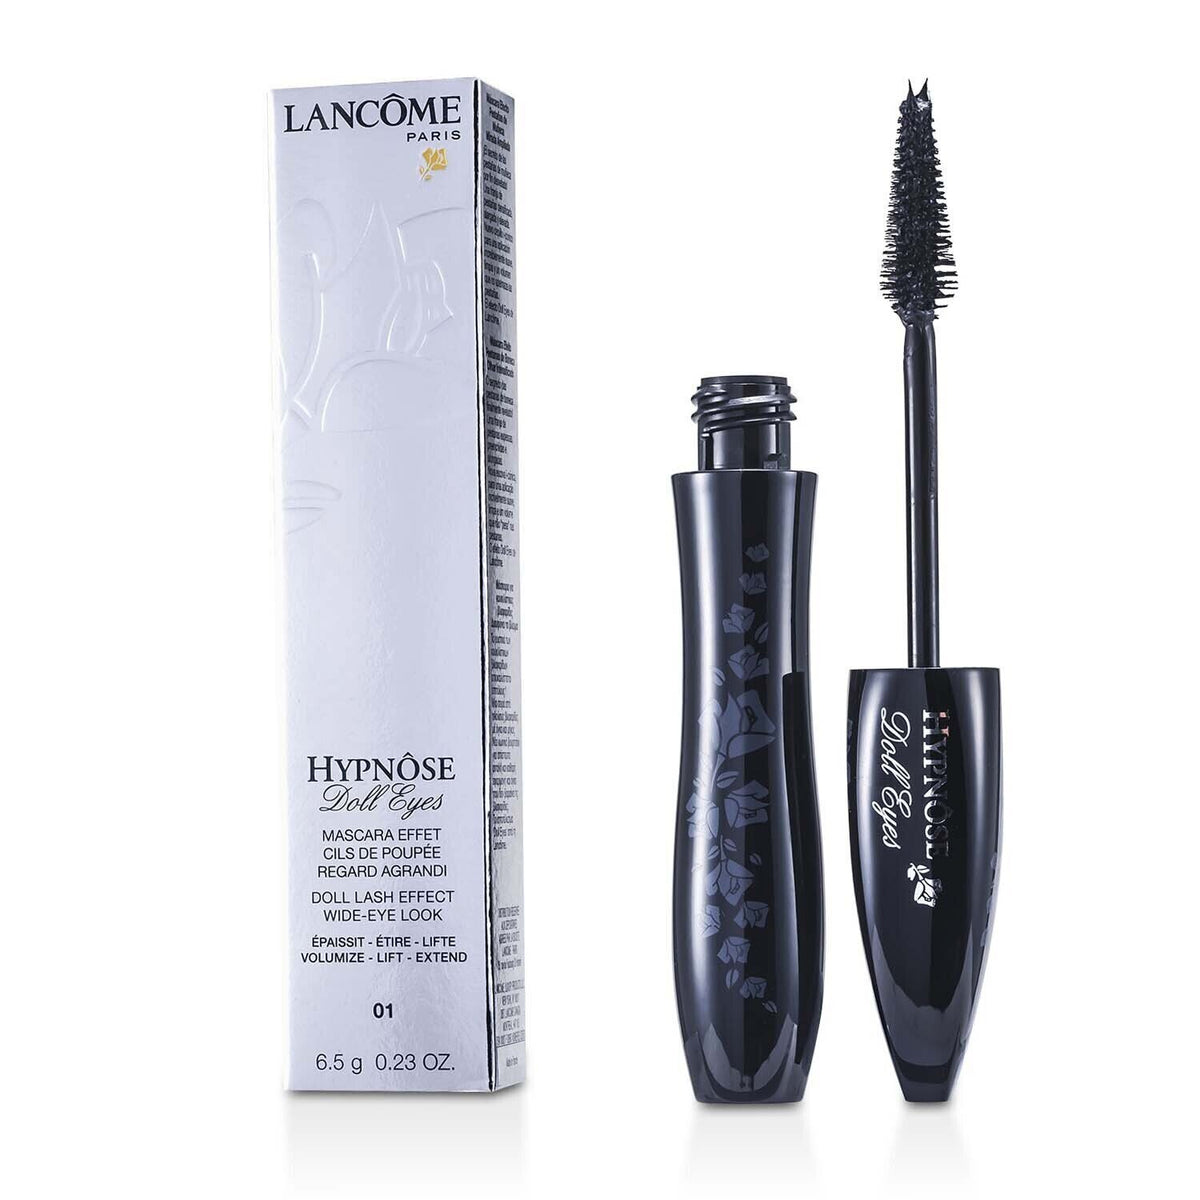 Hypnose Doll Eyes Mascara for | Lancome, Make Up, Buy Now –